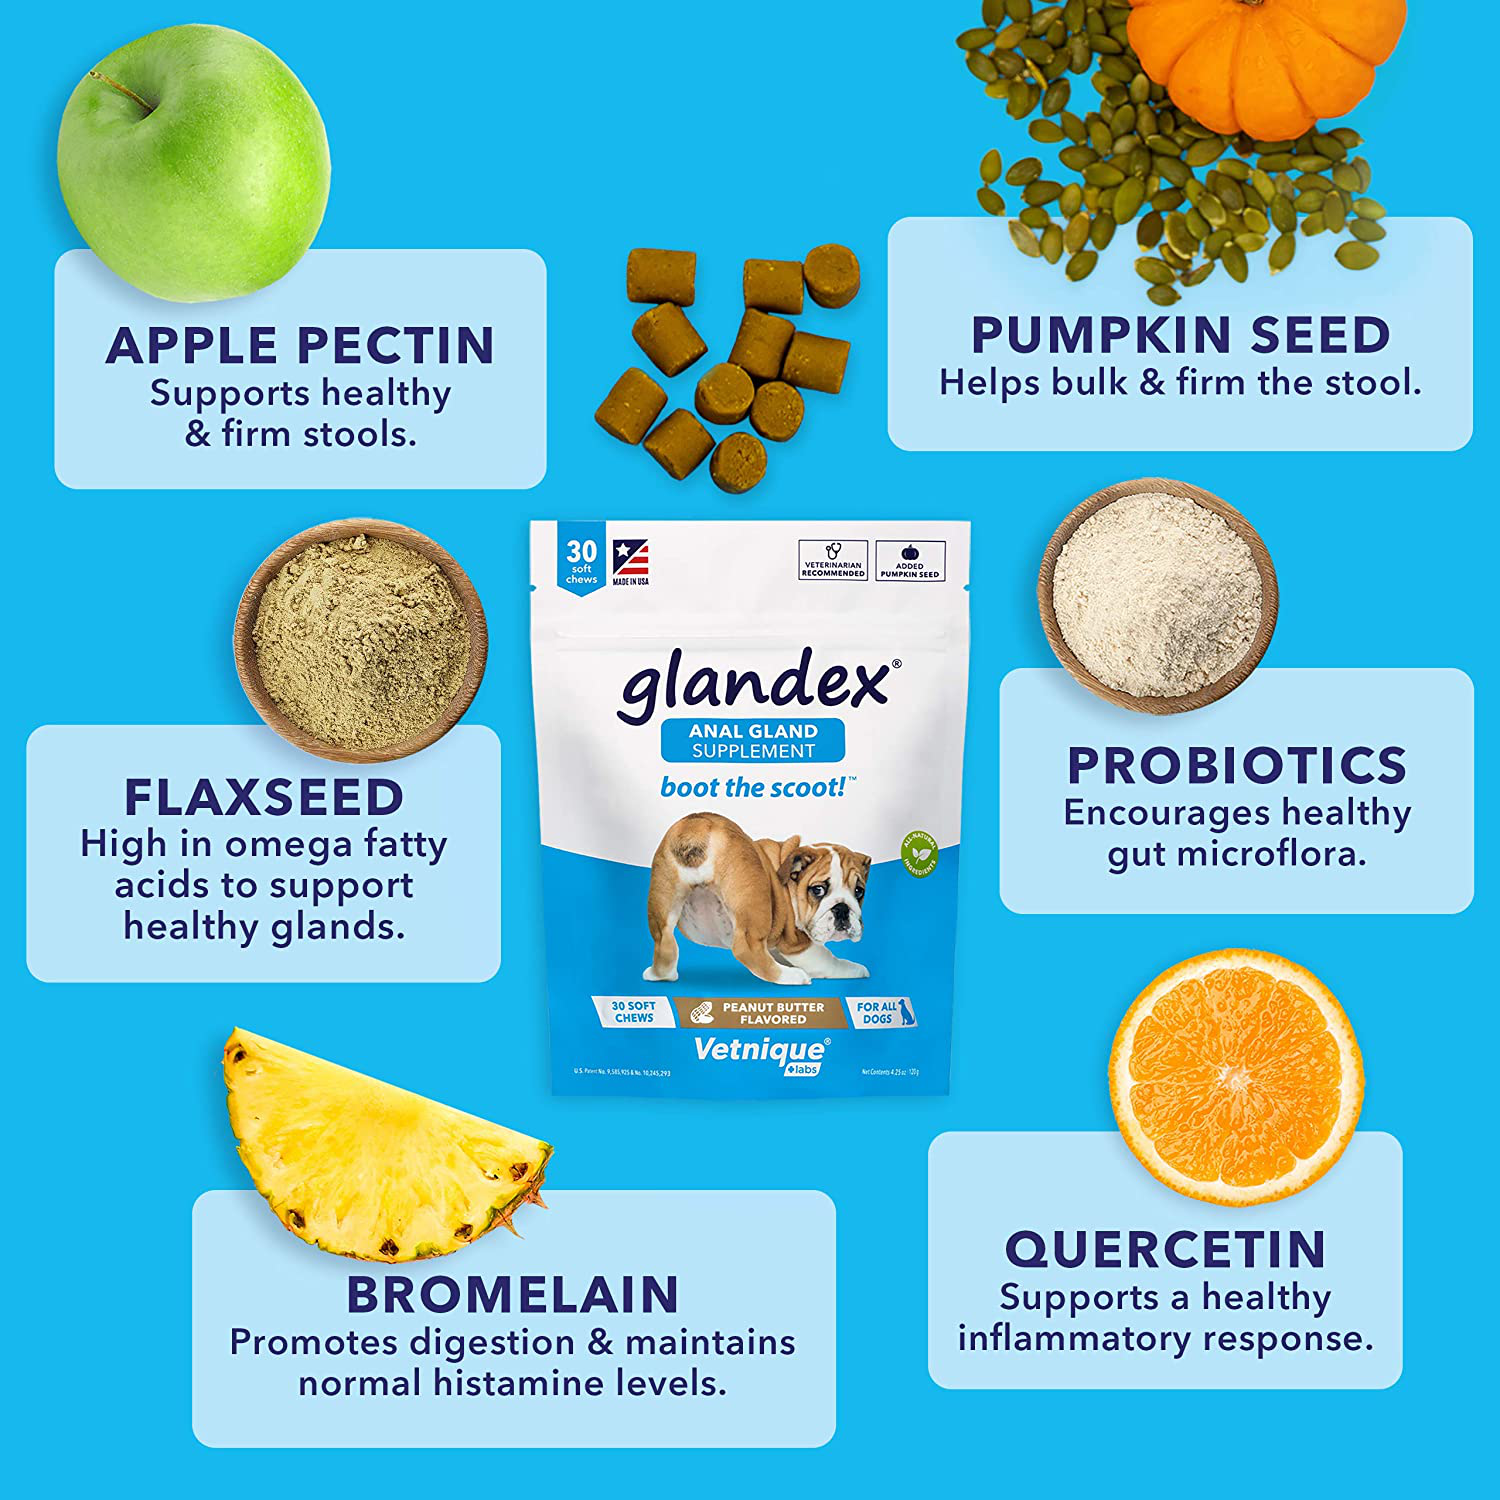 Glandex Anal Gland Soft Chew Treats with Pumpkin for Dogs 30ct Chews with Digestive Enzymes, Probiotics Fiber Supplement for Dogs